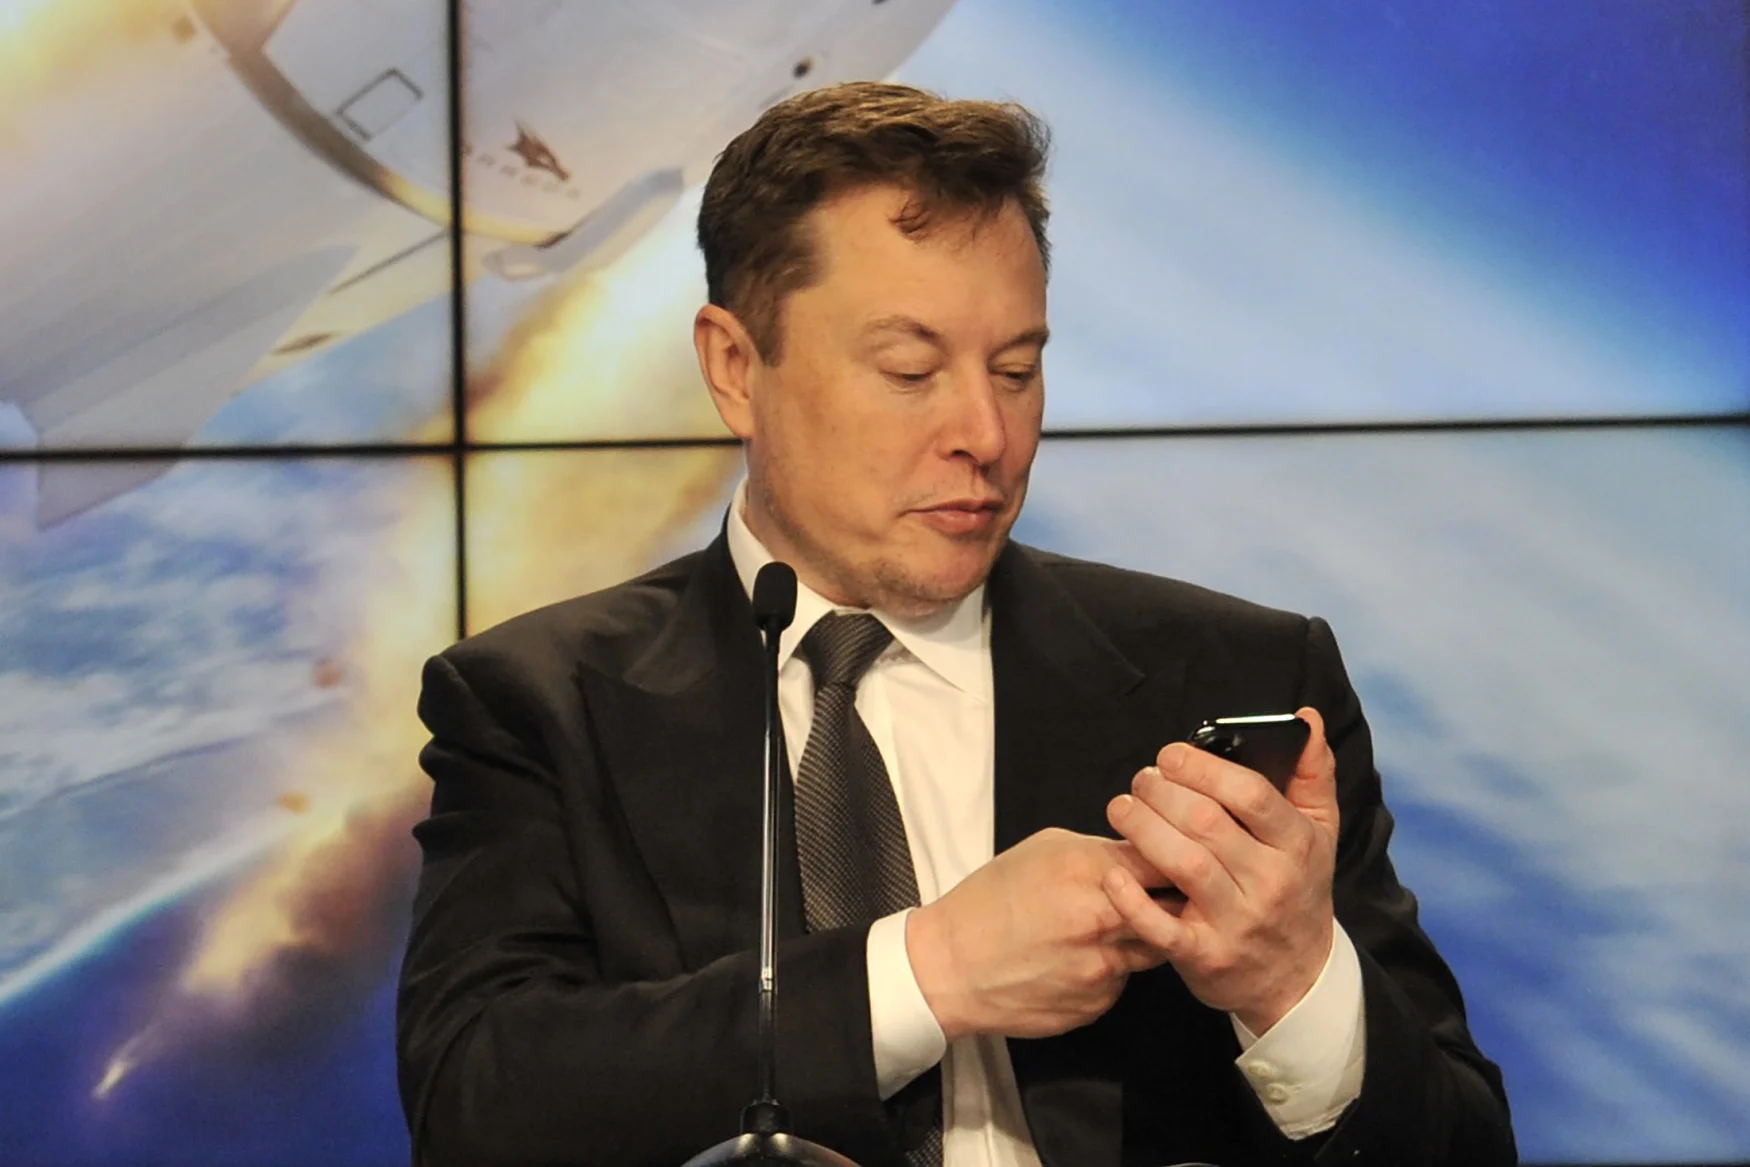 SpaceX founder and chief engineer Elon Musk looks at his mobile phone during a post-launch news conference to discuss the  SpaceX Crew Dragon astronaut capsule in-flight abort test at the Kennedy Space Center in Cape Canaveral, Florida, U.S. January 19, 2020. REUTERS/Steve Nesius